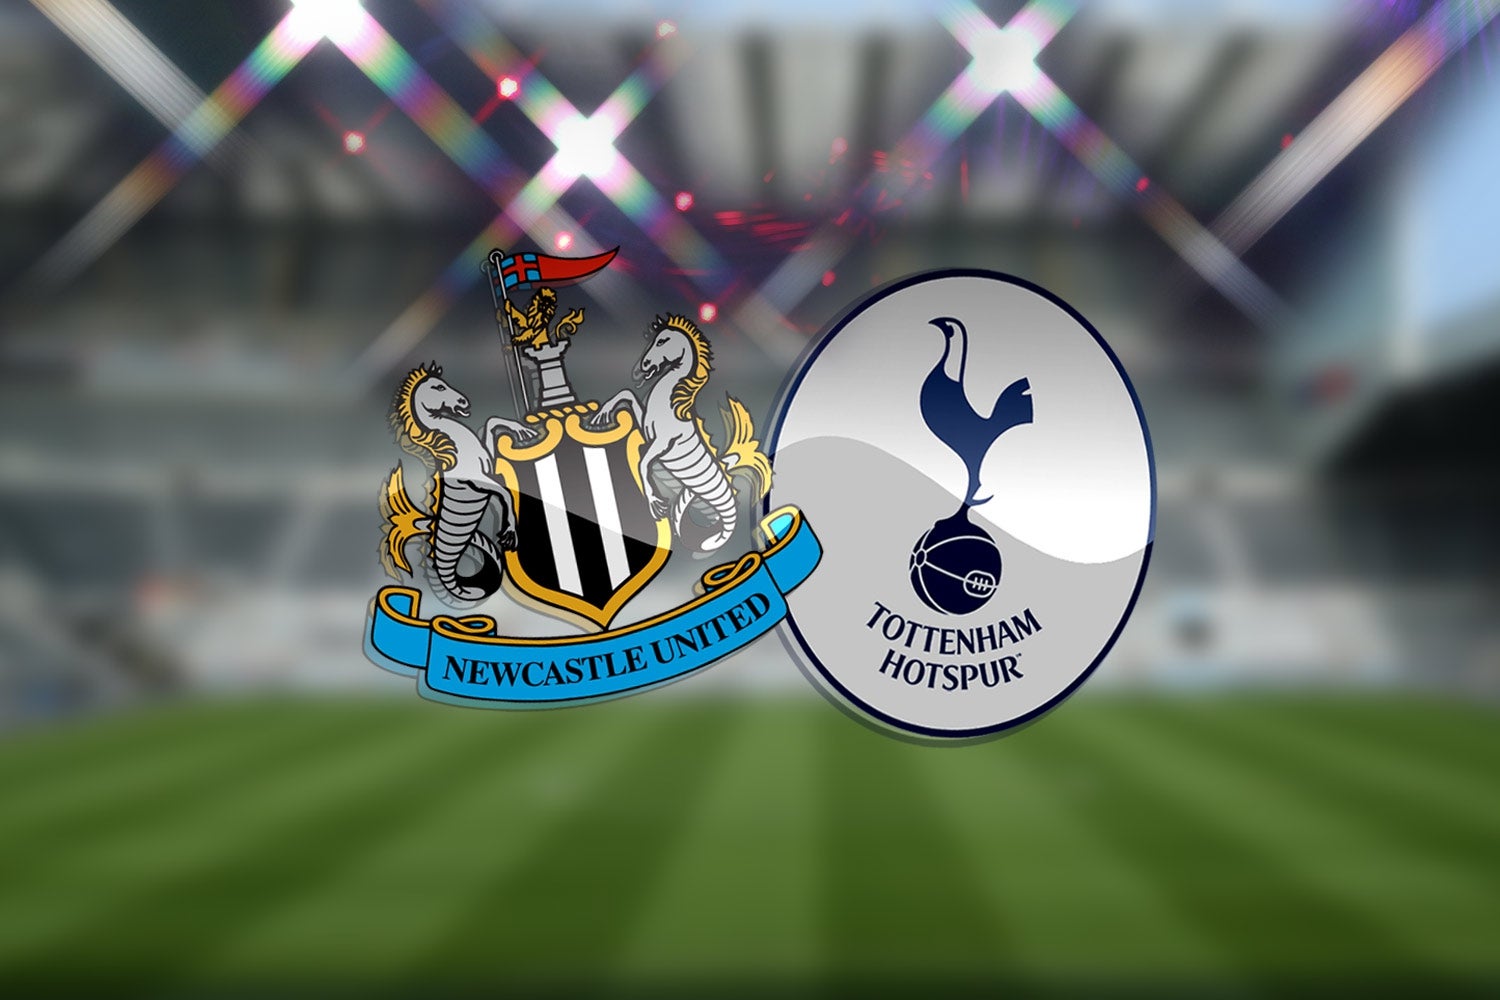 Newcastle United vs Tottenham: Team news. match facts and prediction